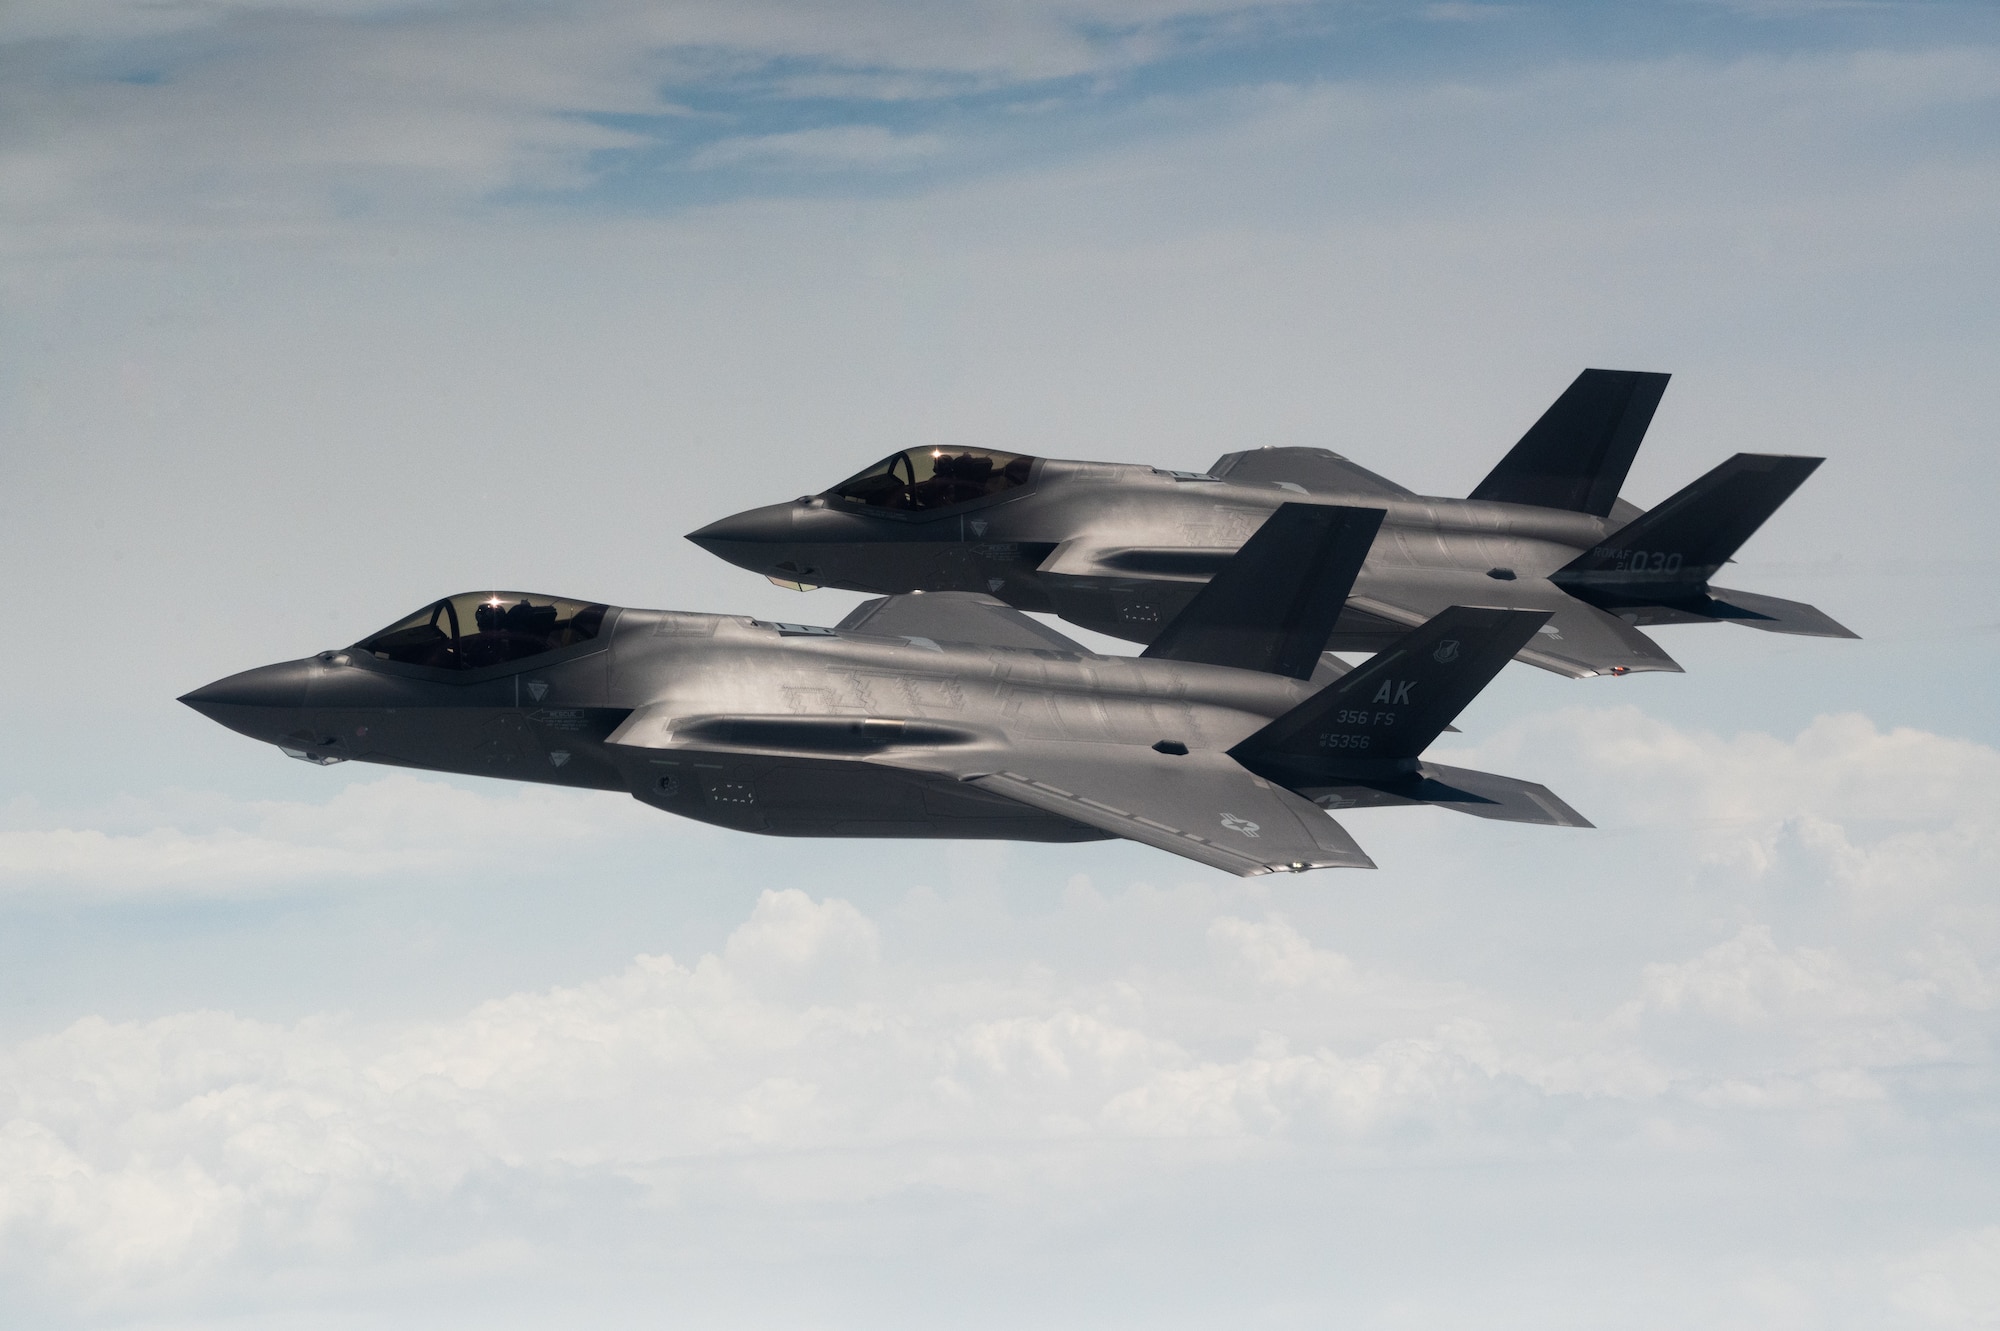 U.S. Air Force F-35 Lightning IIs from the 365th Fighter Squadron at Eielson Air Force Base fly side by side with Republic of Korea Air Force F-35s from the 151st and 152nd Combat Flight Squadrons as part of a bilateral exercise over the Yellow Sea, Republic of Korea